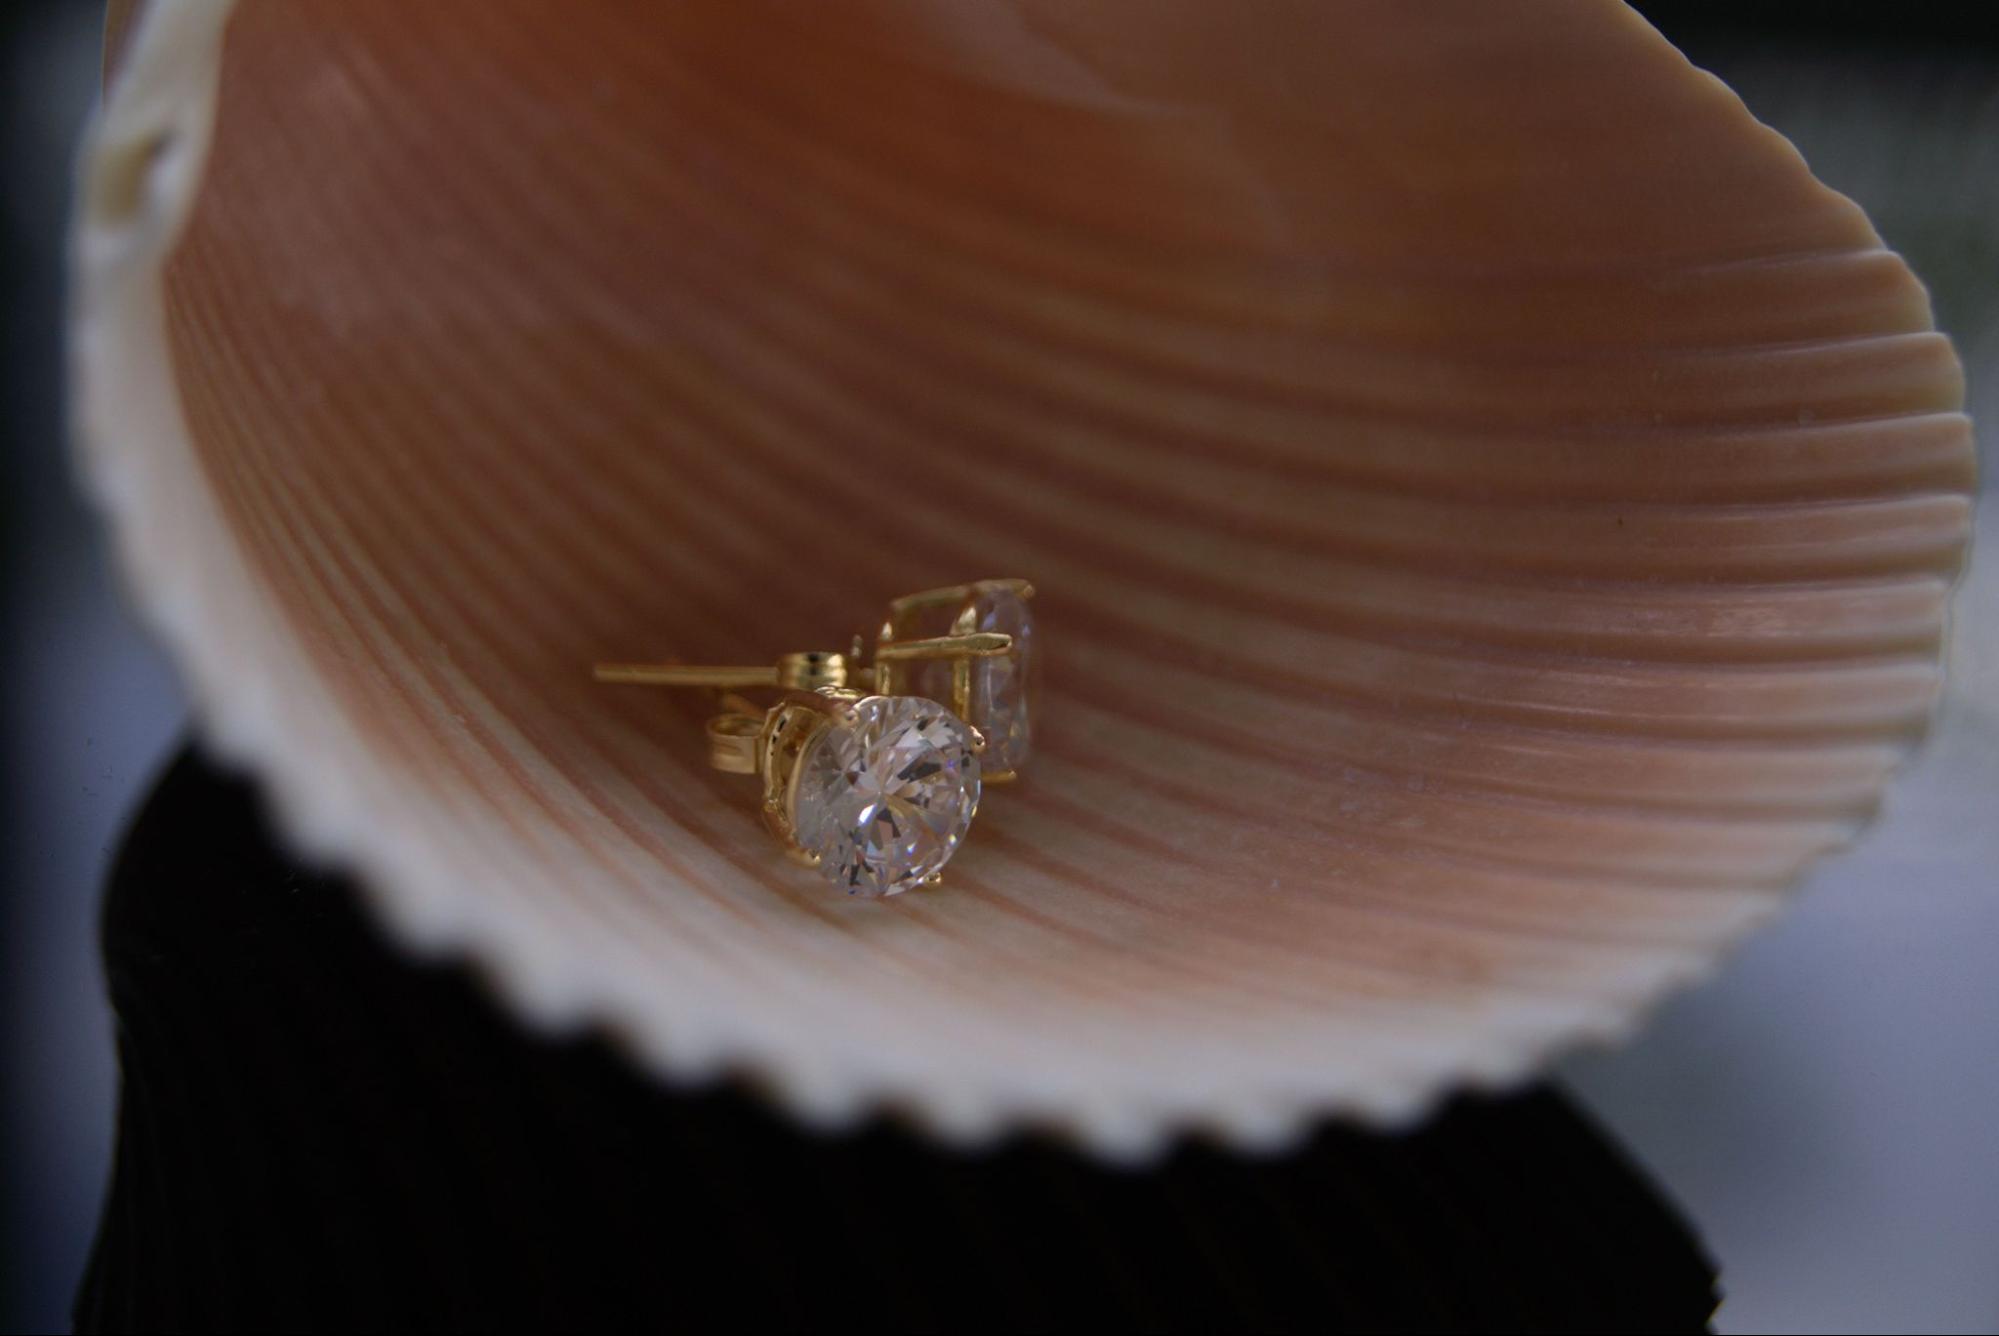 Pair of diamond stud earrings sitting in a hollow sea shell